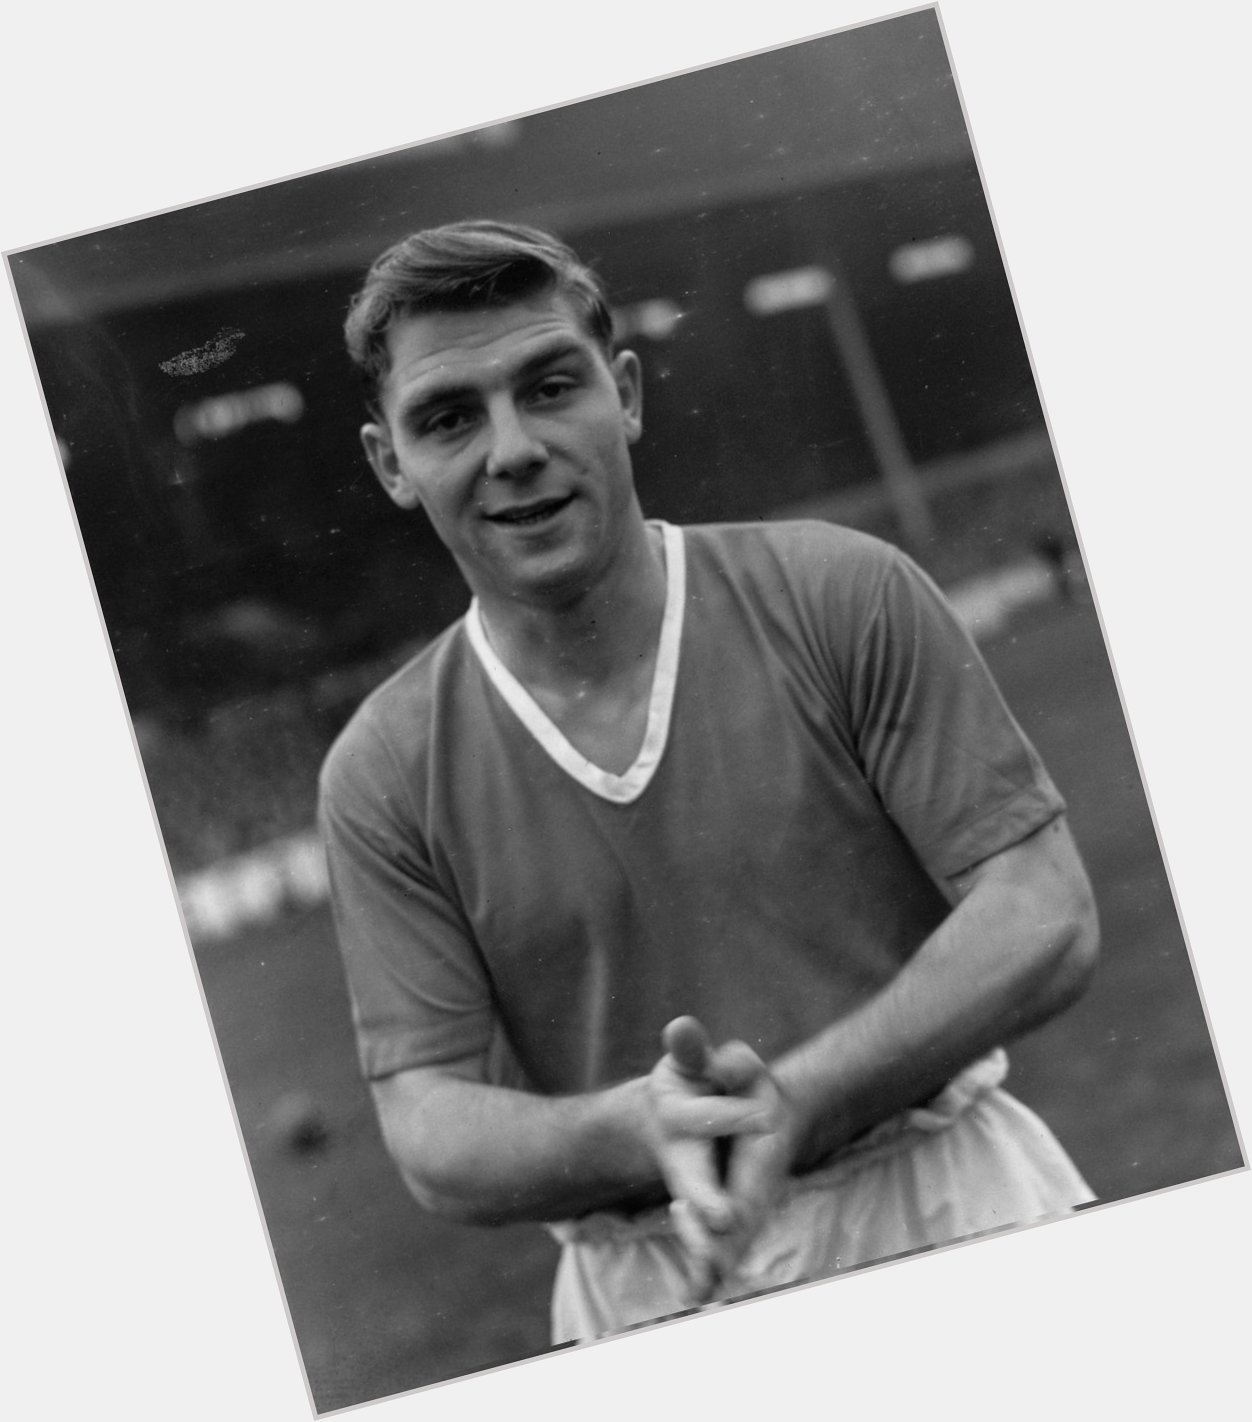 Happy birthday to the greatest player of all time, Duncan Edwards! 